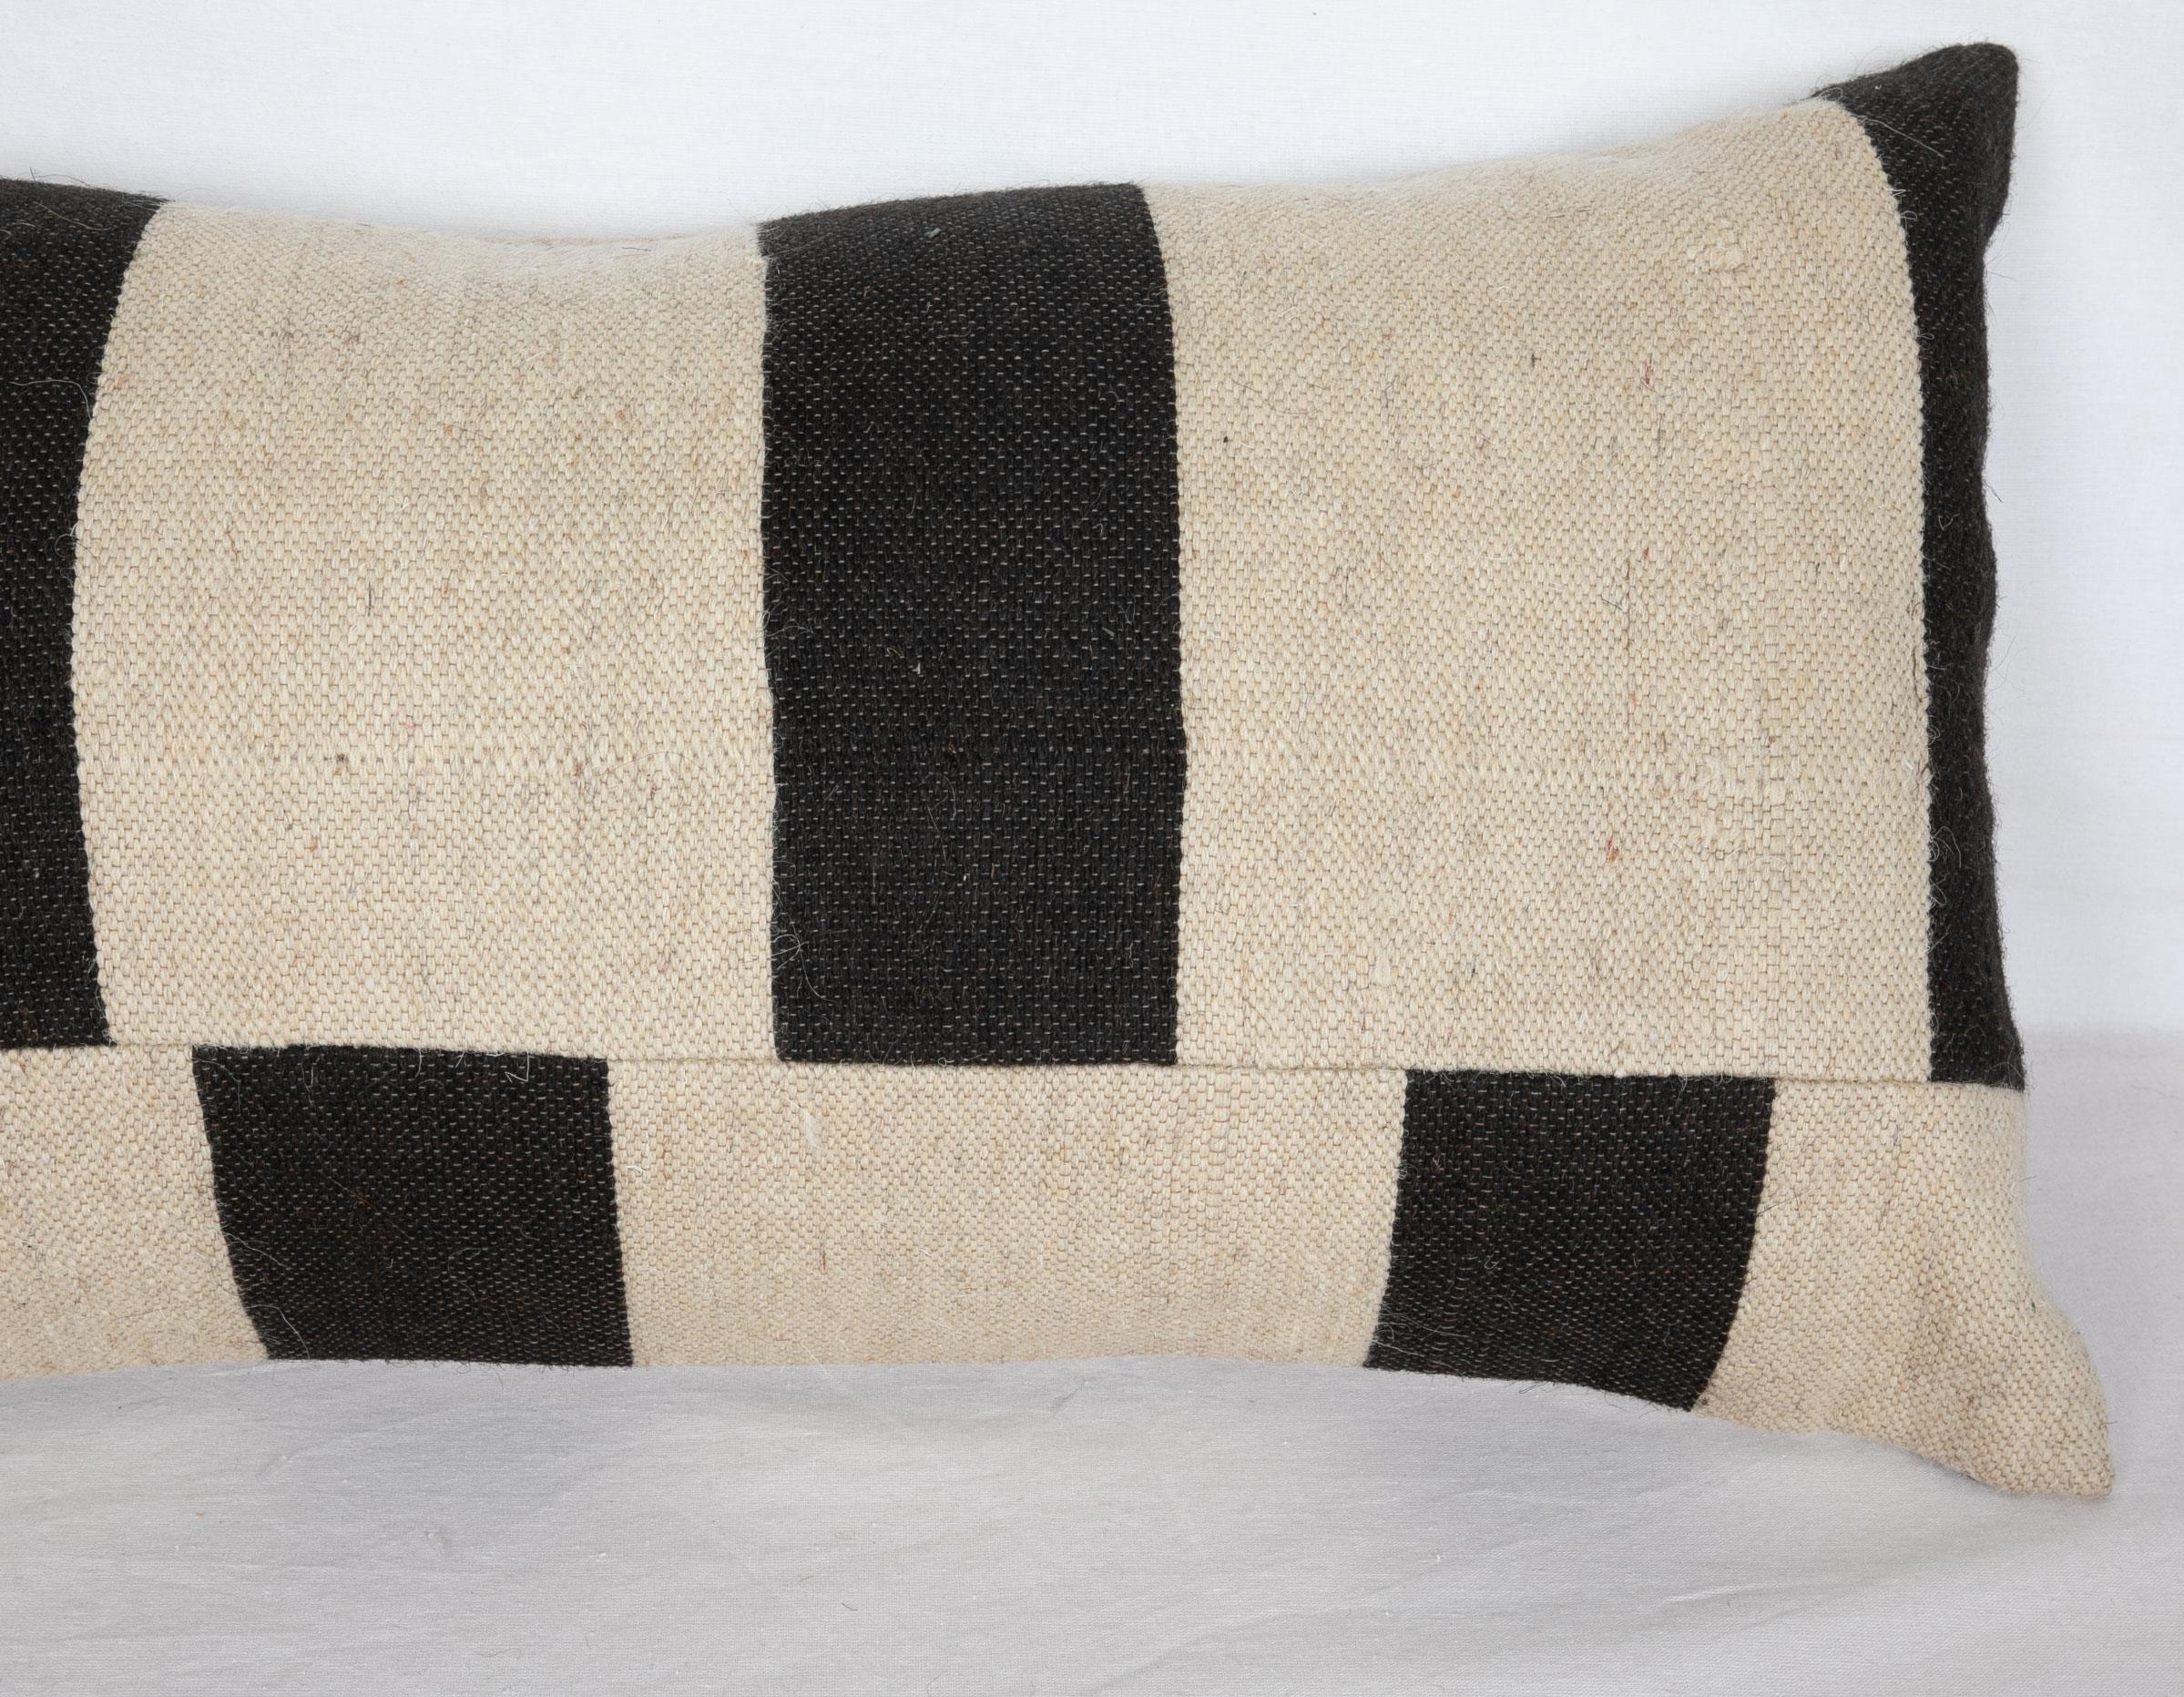 Turkish Lumbar Pillow Case Fashioned from Contemporary Weaving